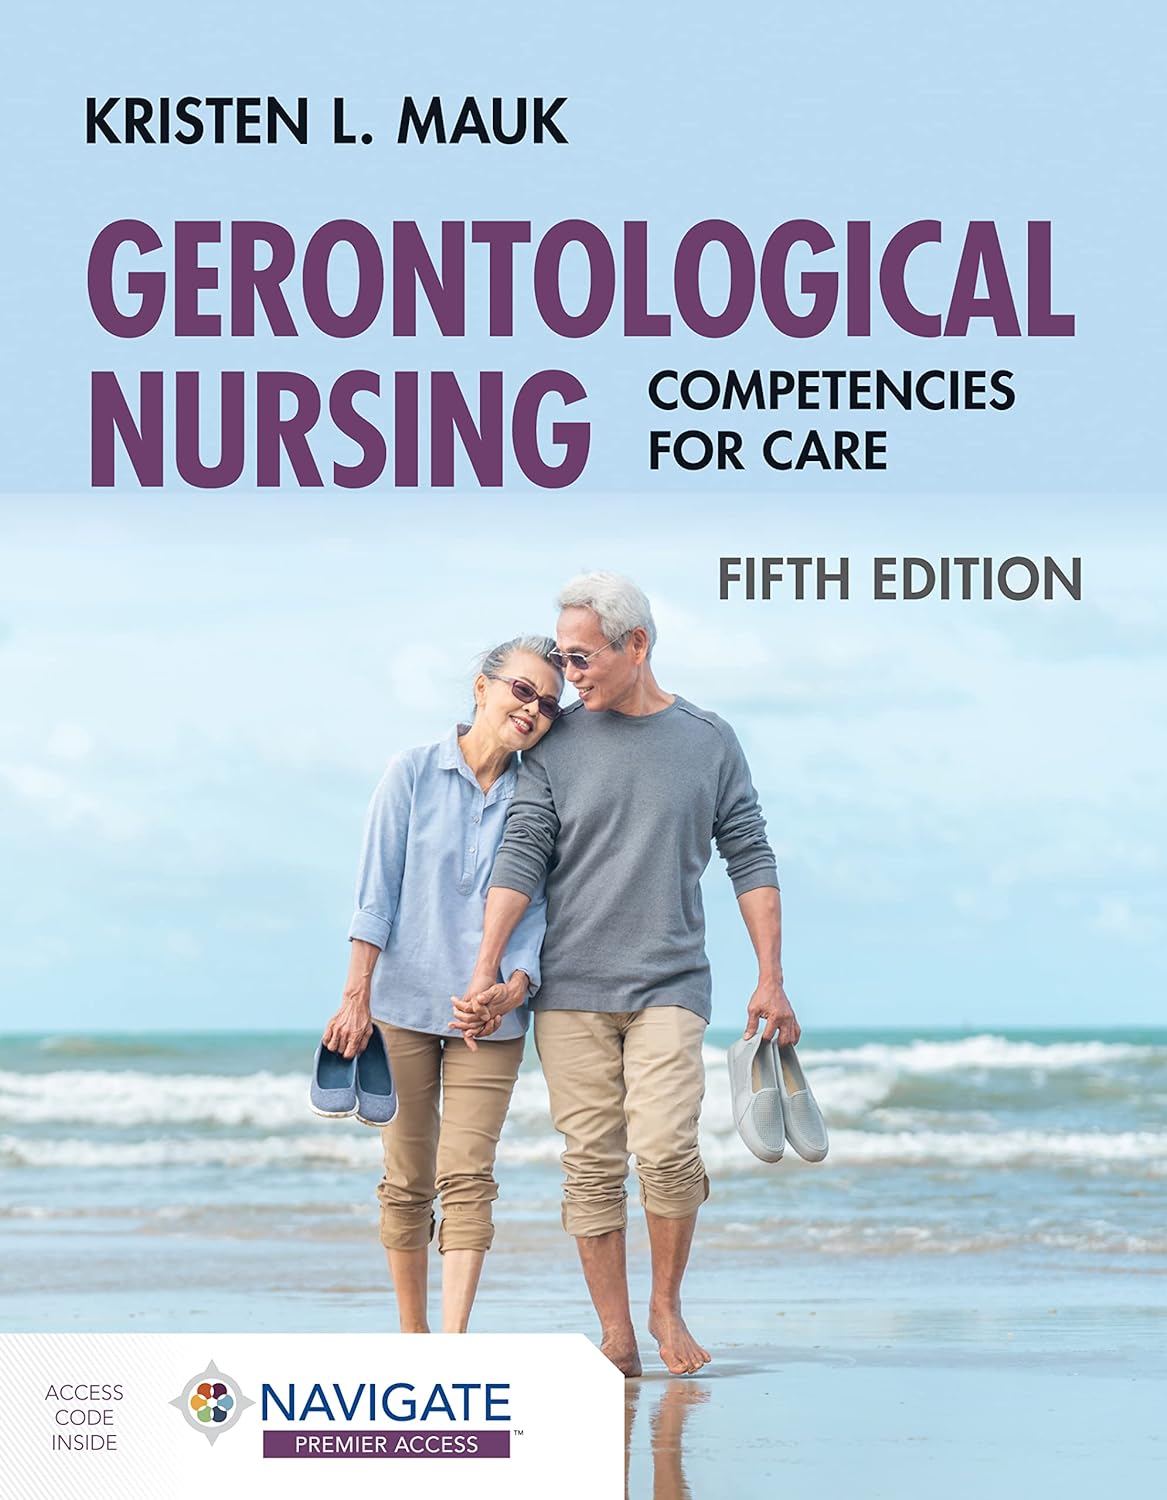 Gerontological Nursing: Competencies for Care, 5th Edition by  Kristen L. Mauk